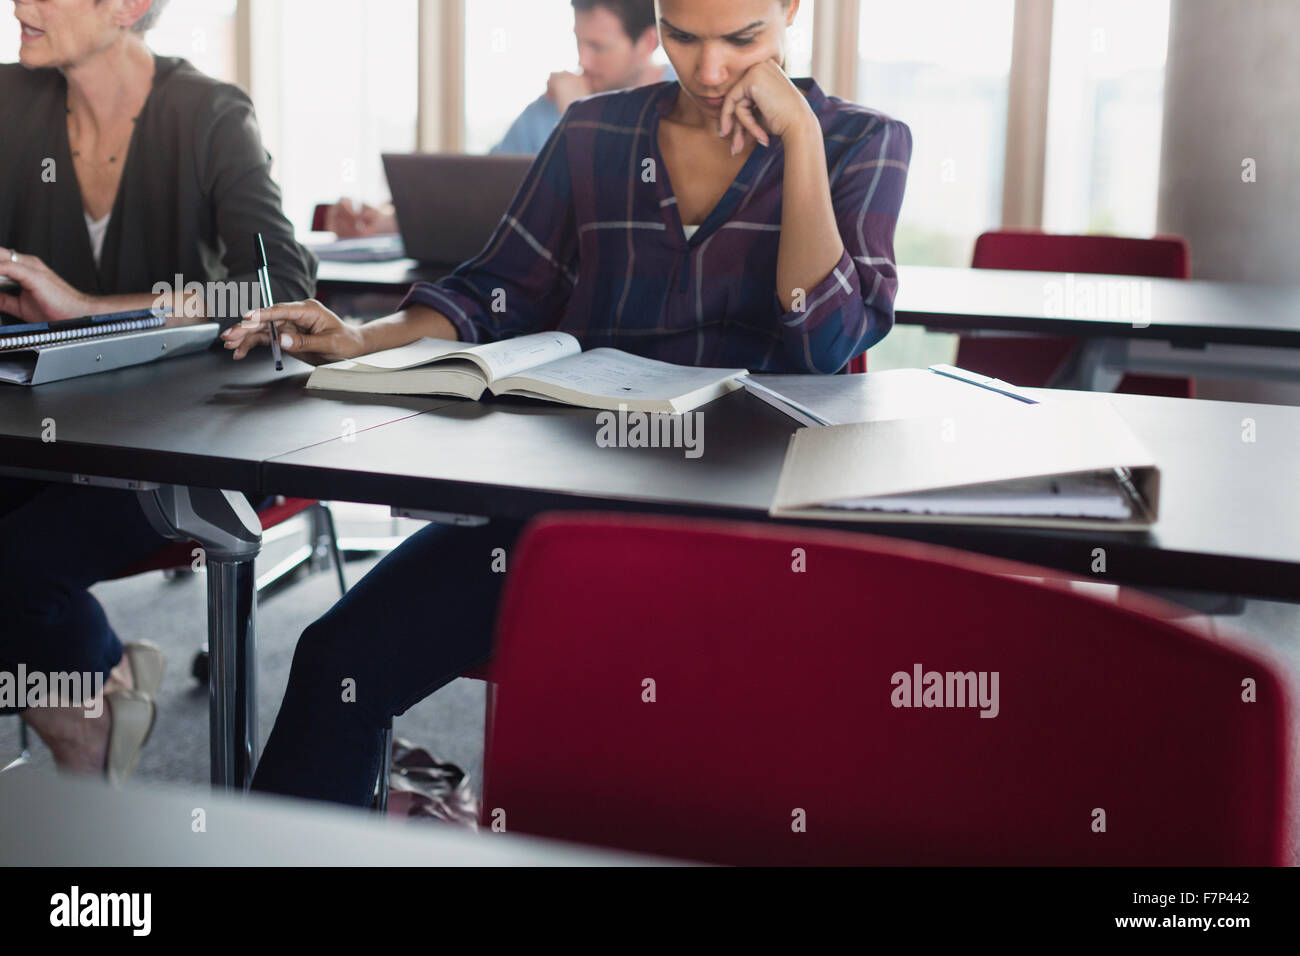 Focused woman studying with textbook in adult education classroom Stock Photo